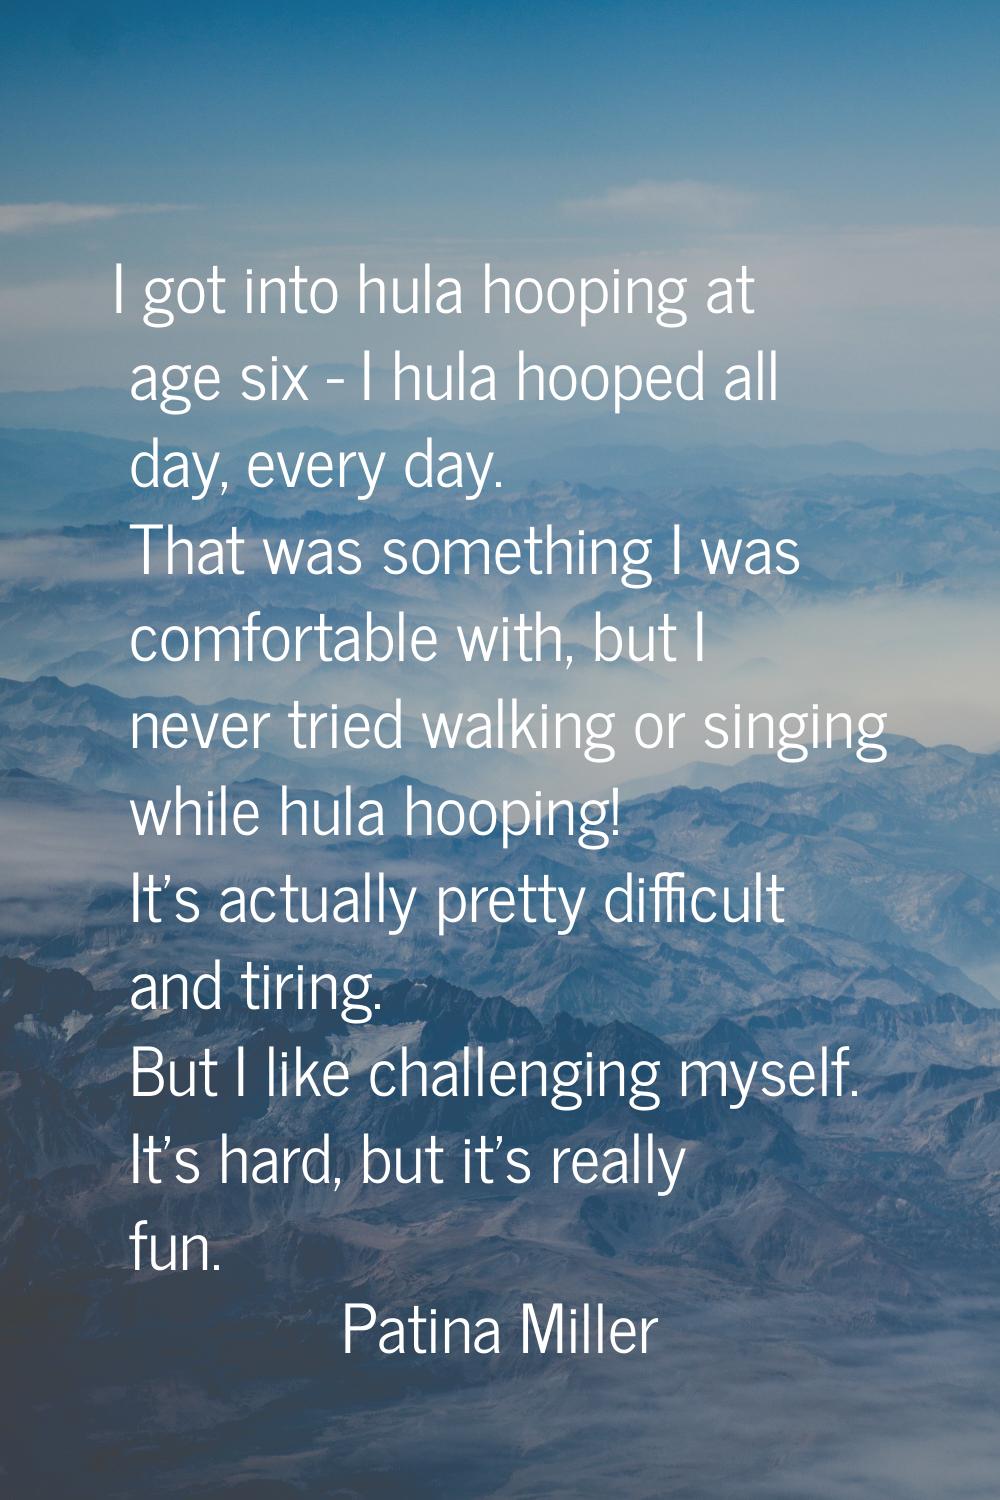 I got into hula hooping at age six - I hula hooped all day, every day. That was something I was com